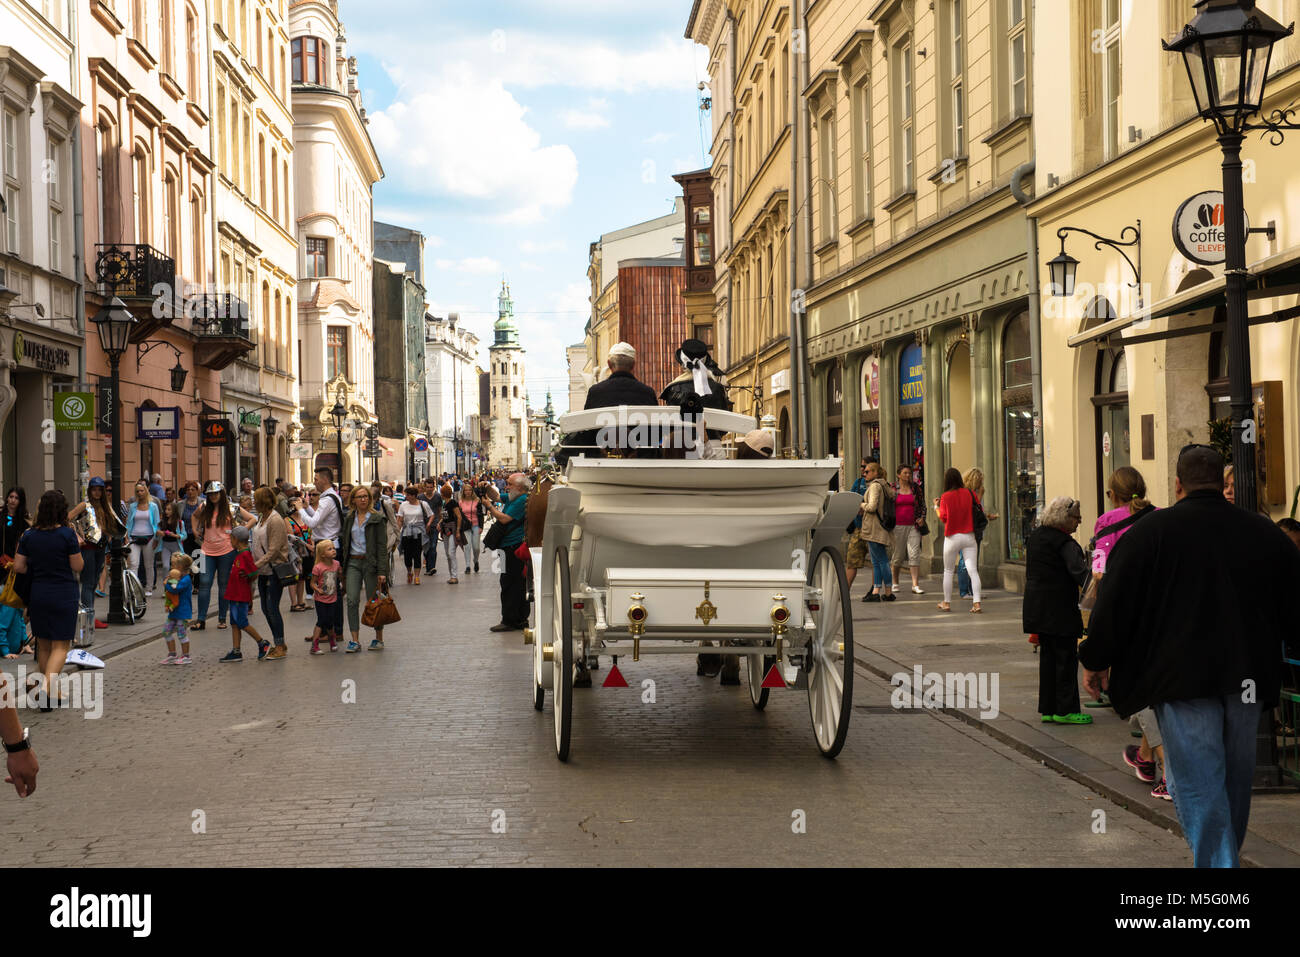 Krakow, Poland - August, 2017: city street with lots of people on the background. Stock Photo